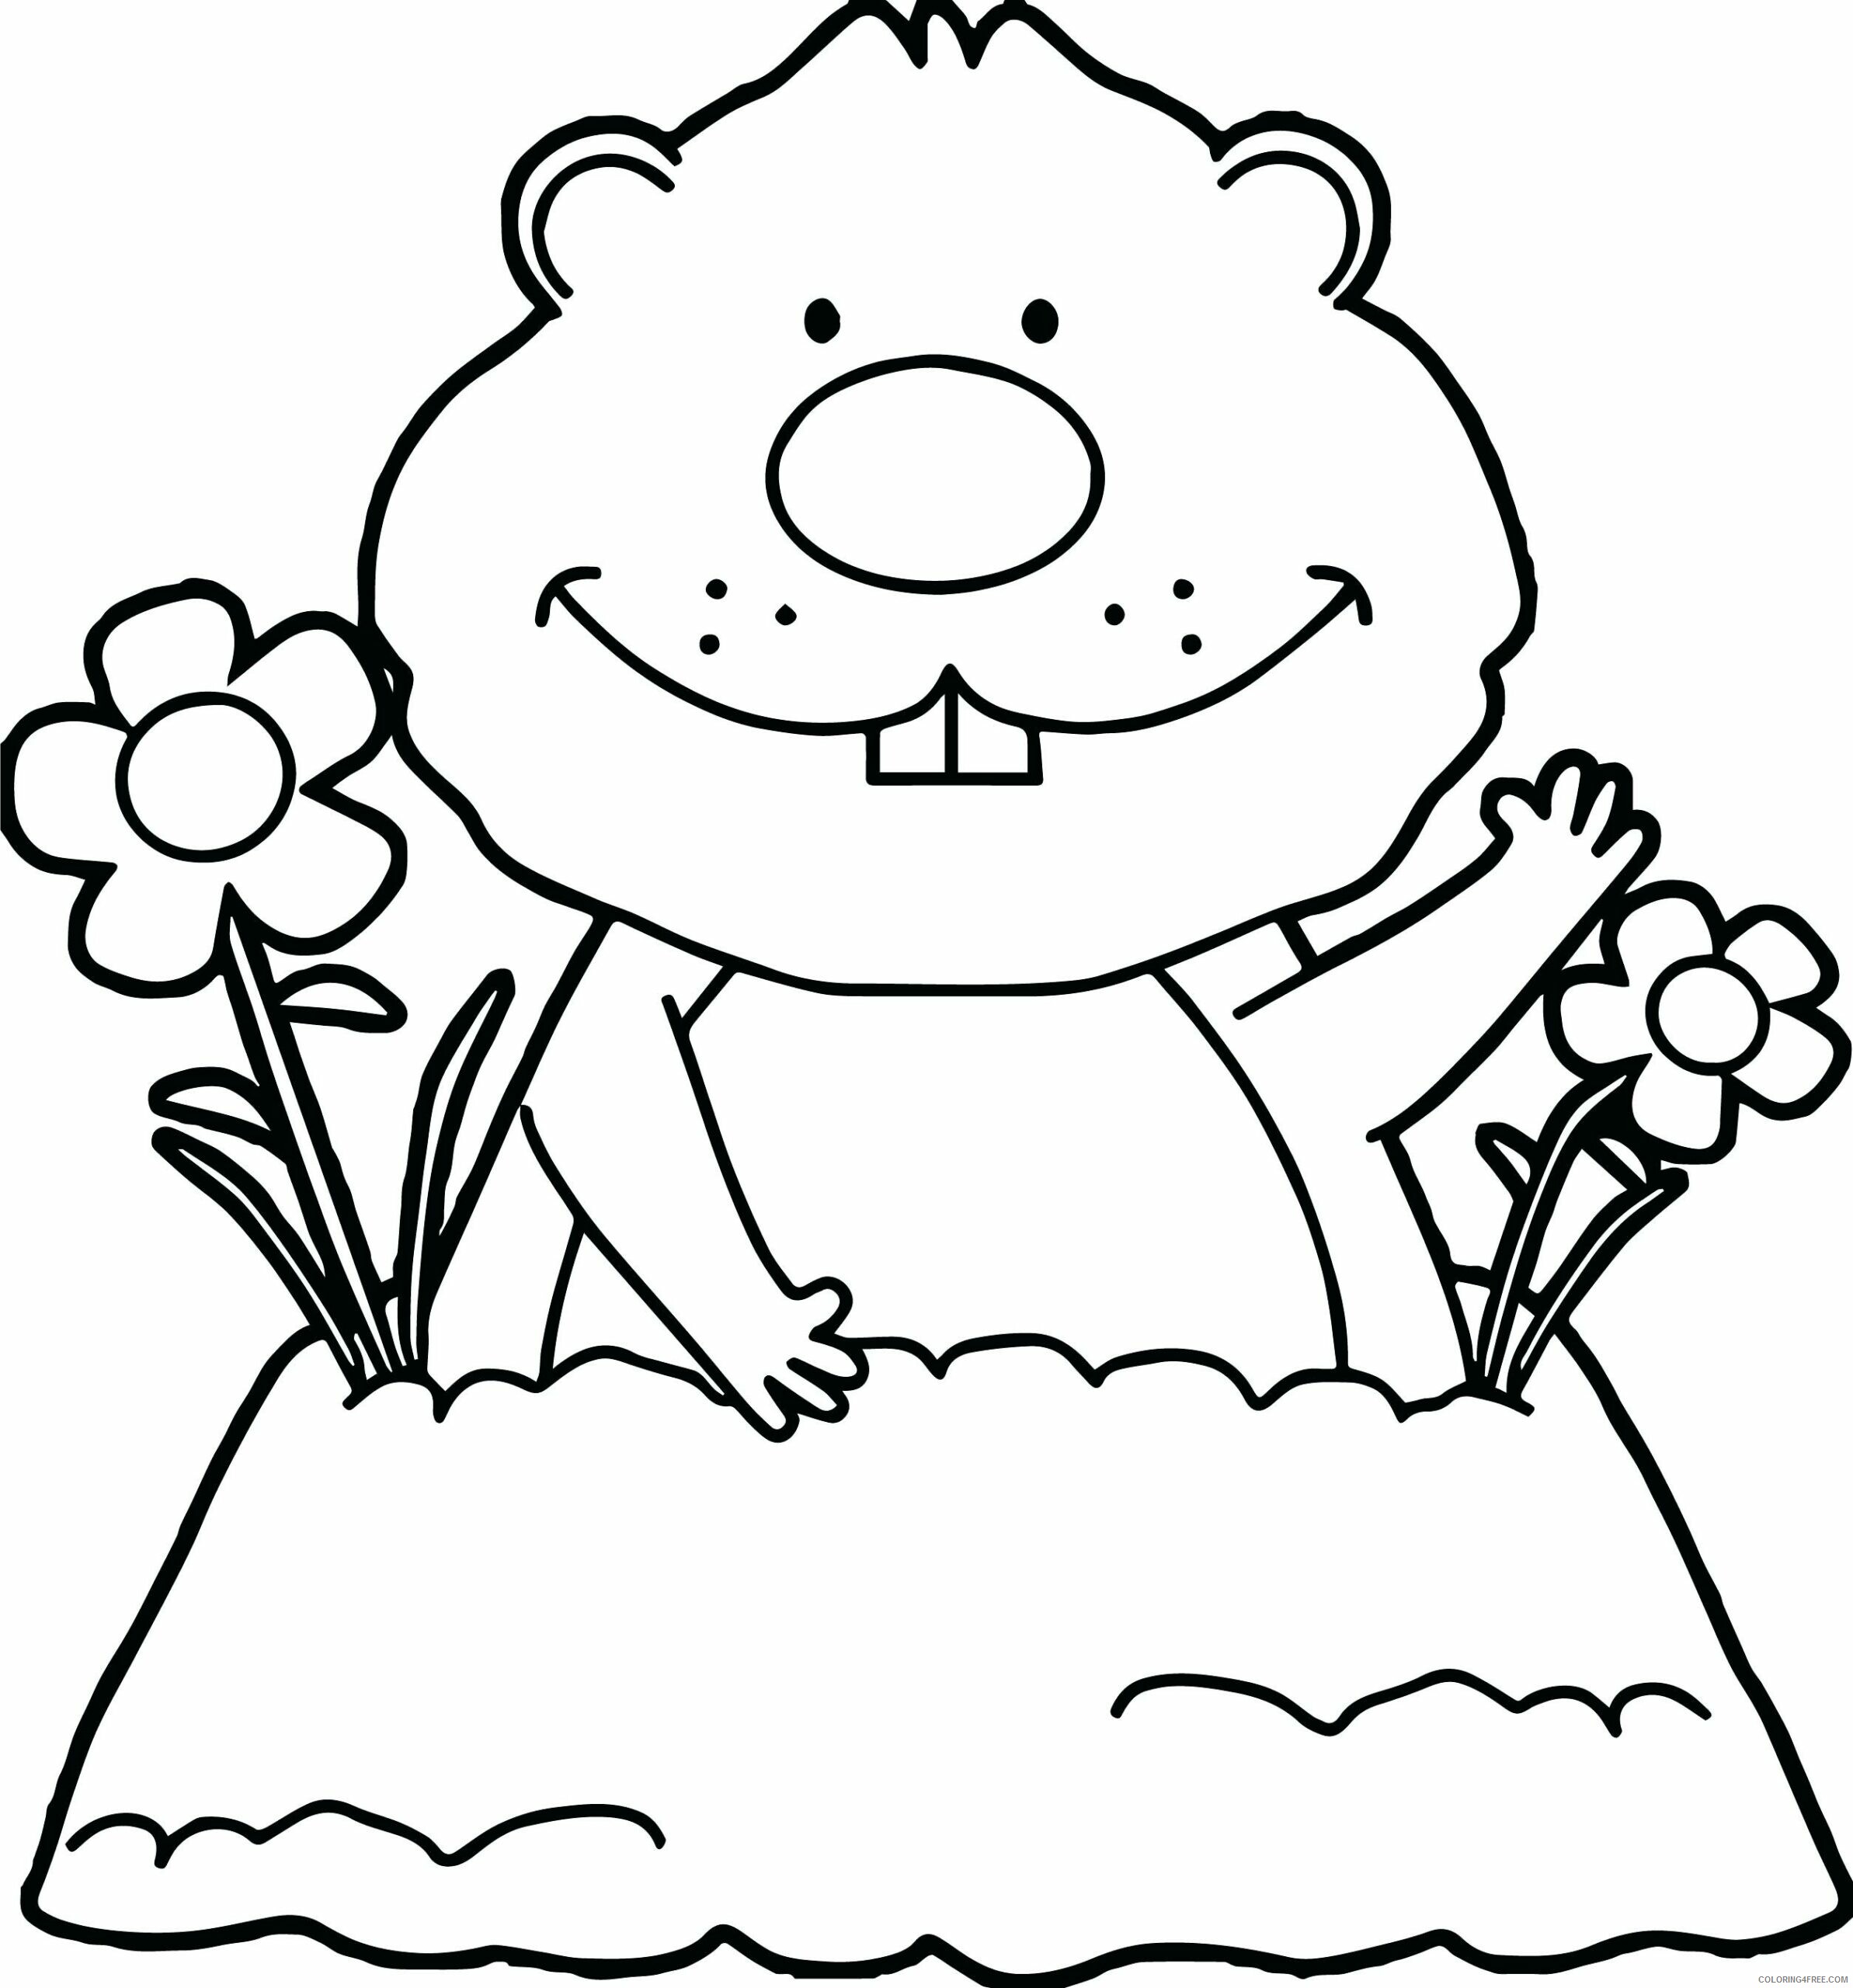 Groundhog Day Coloring Pages Holiday Happy Groundhog Day Printable 2021 0586 Coloring4free